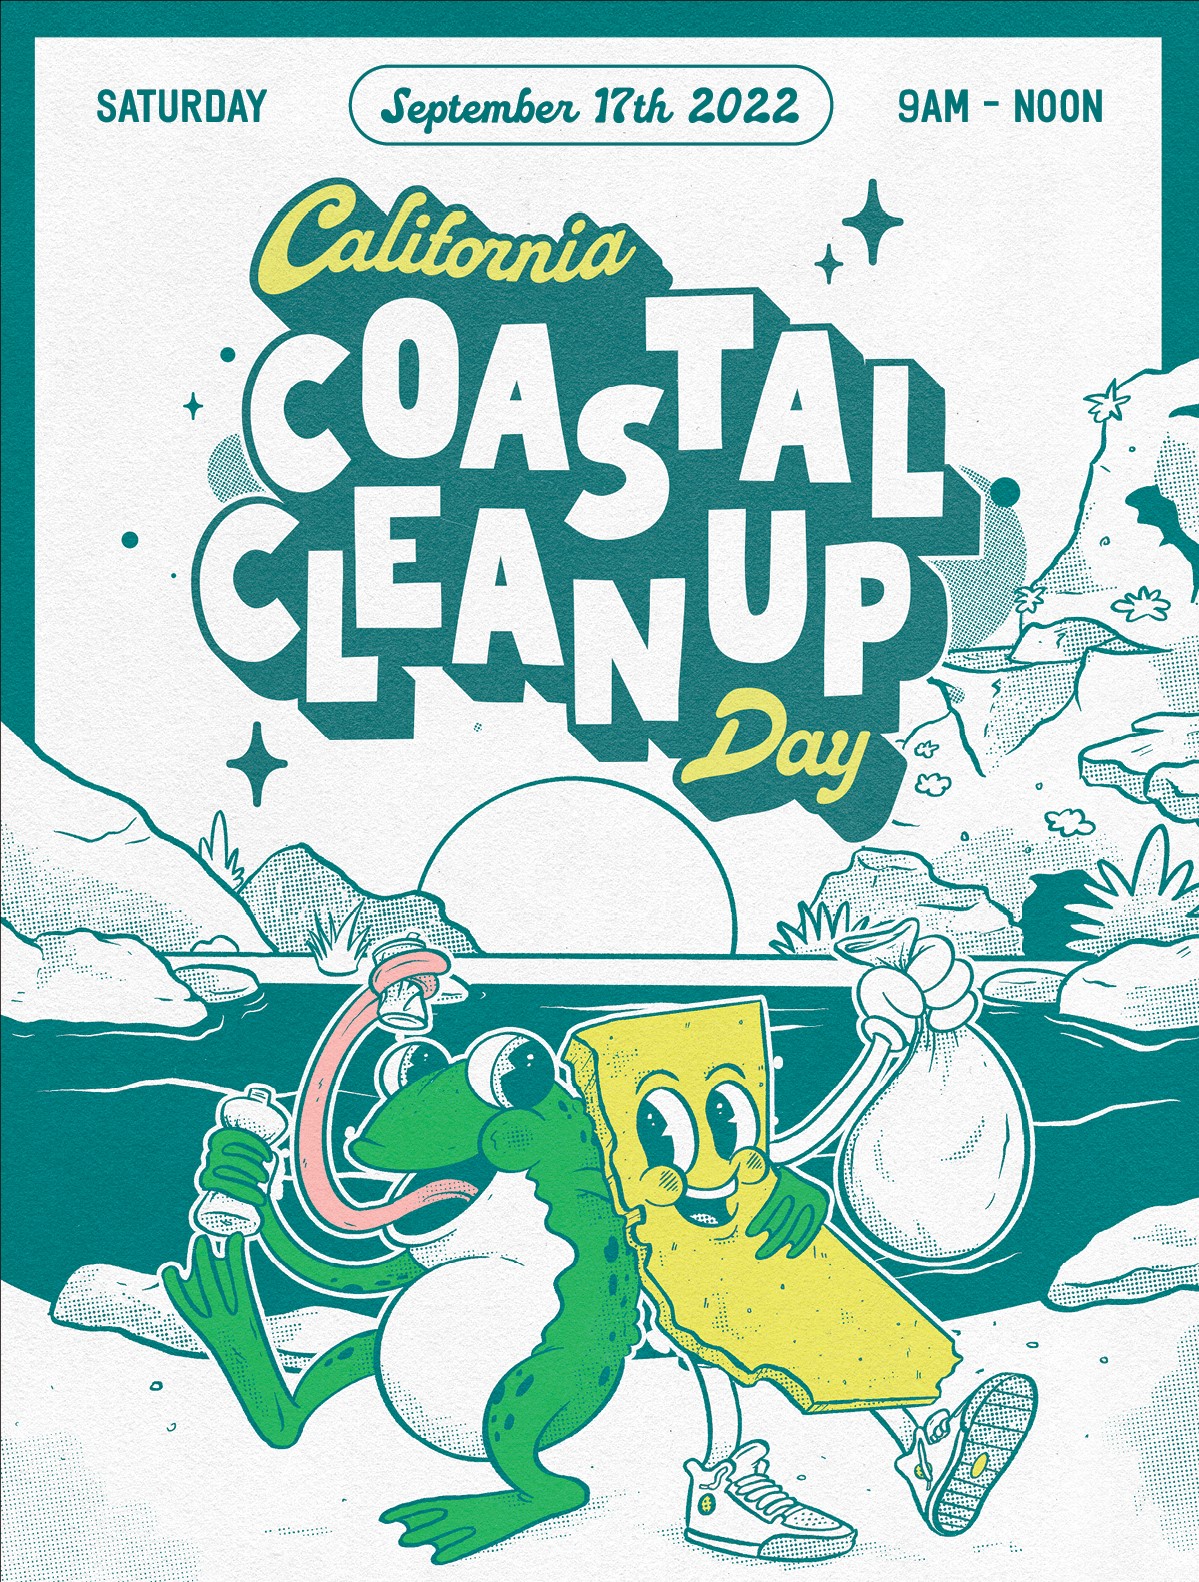 California Coastal Cleanup Day poster image. Shows a cartoon frog and State of California with arms around eachother and holding trashbags